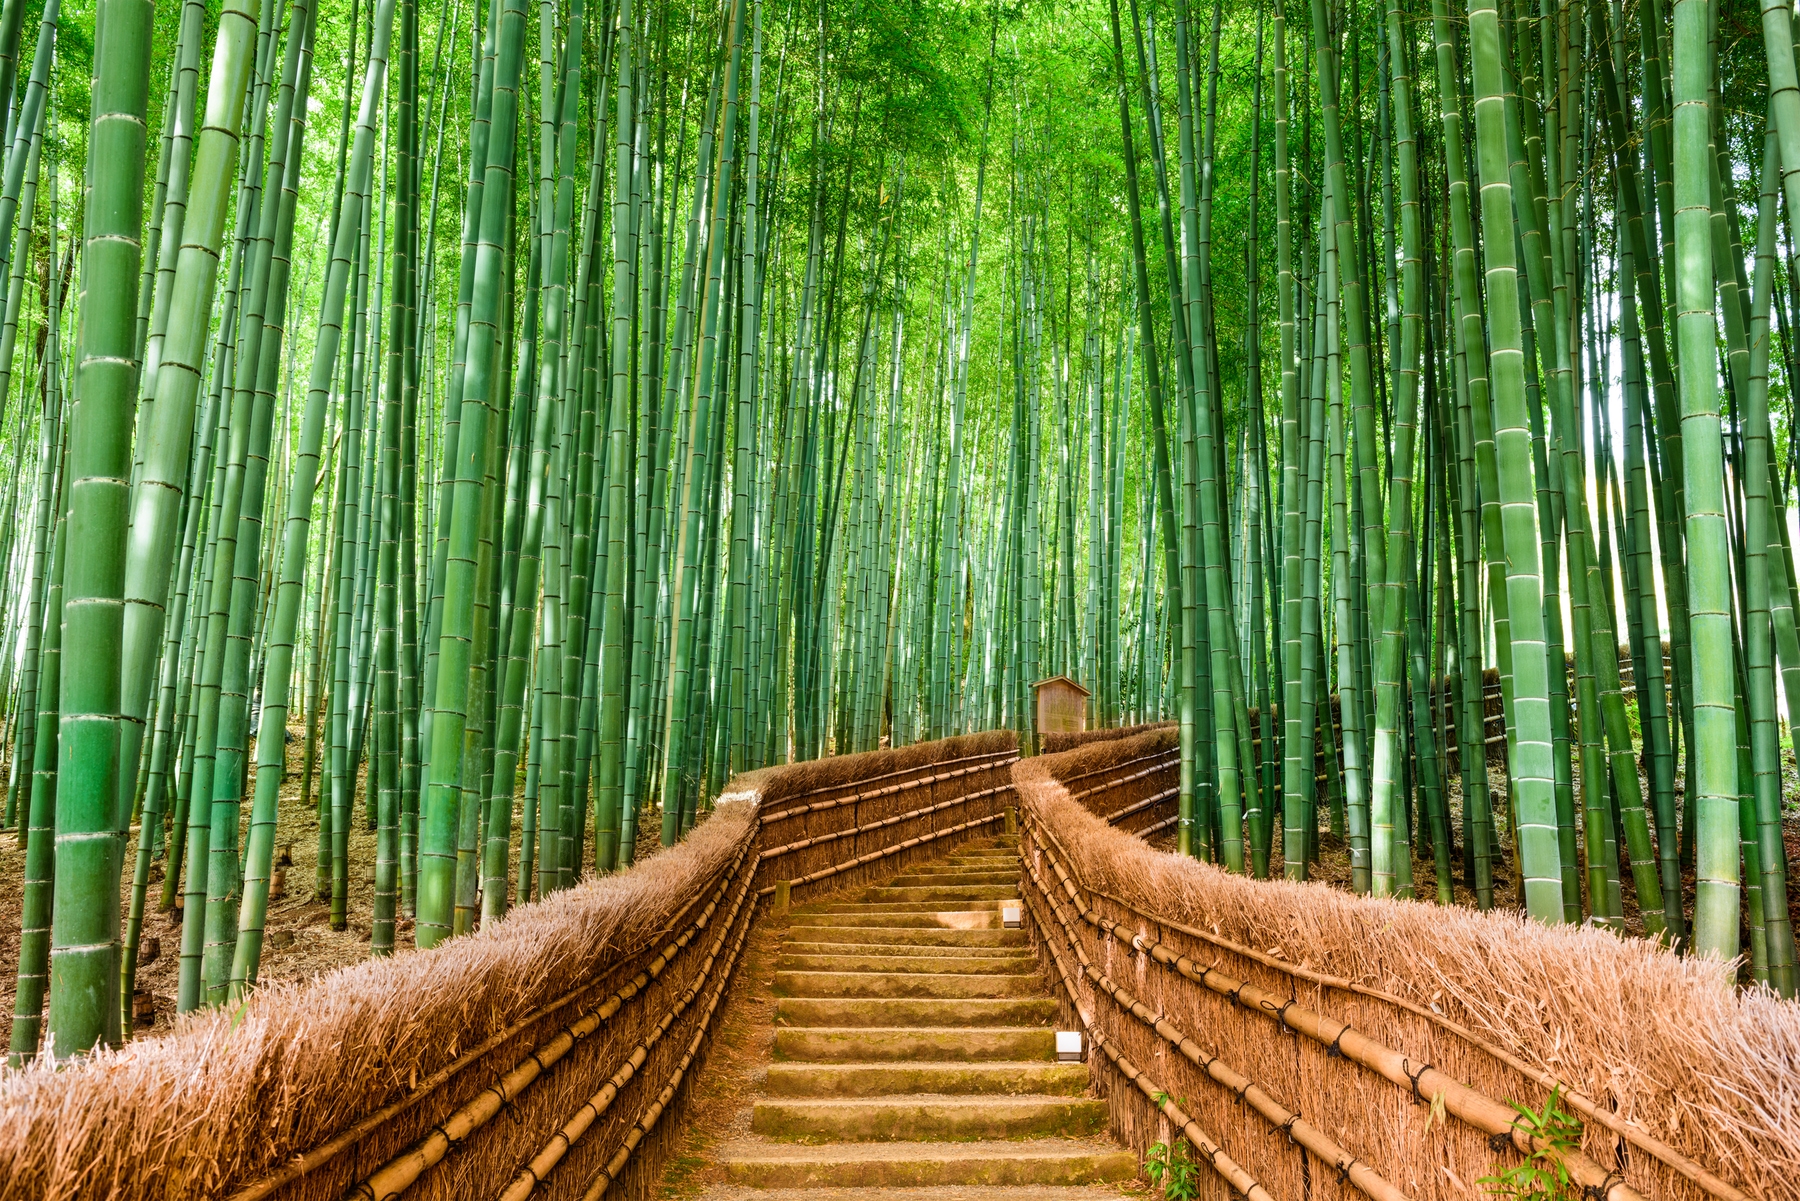 Bamboo forest Kyoto Wall mural | Photo wallpaper - Happywall